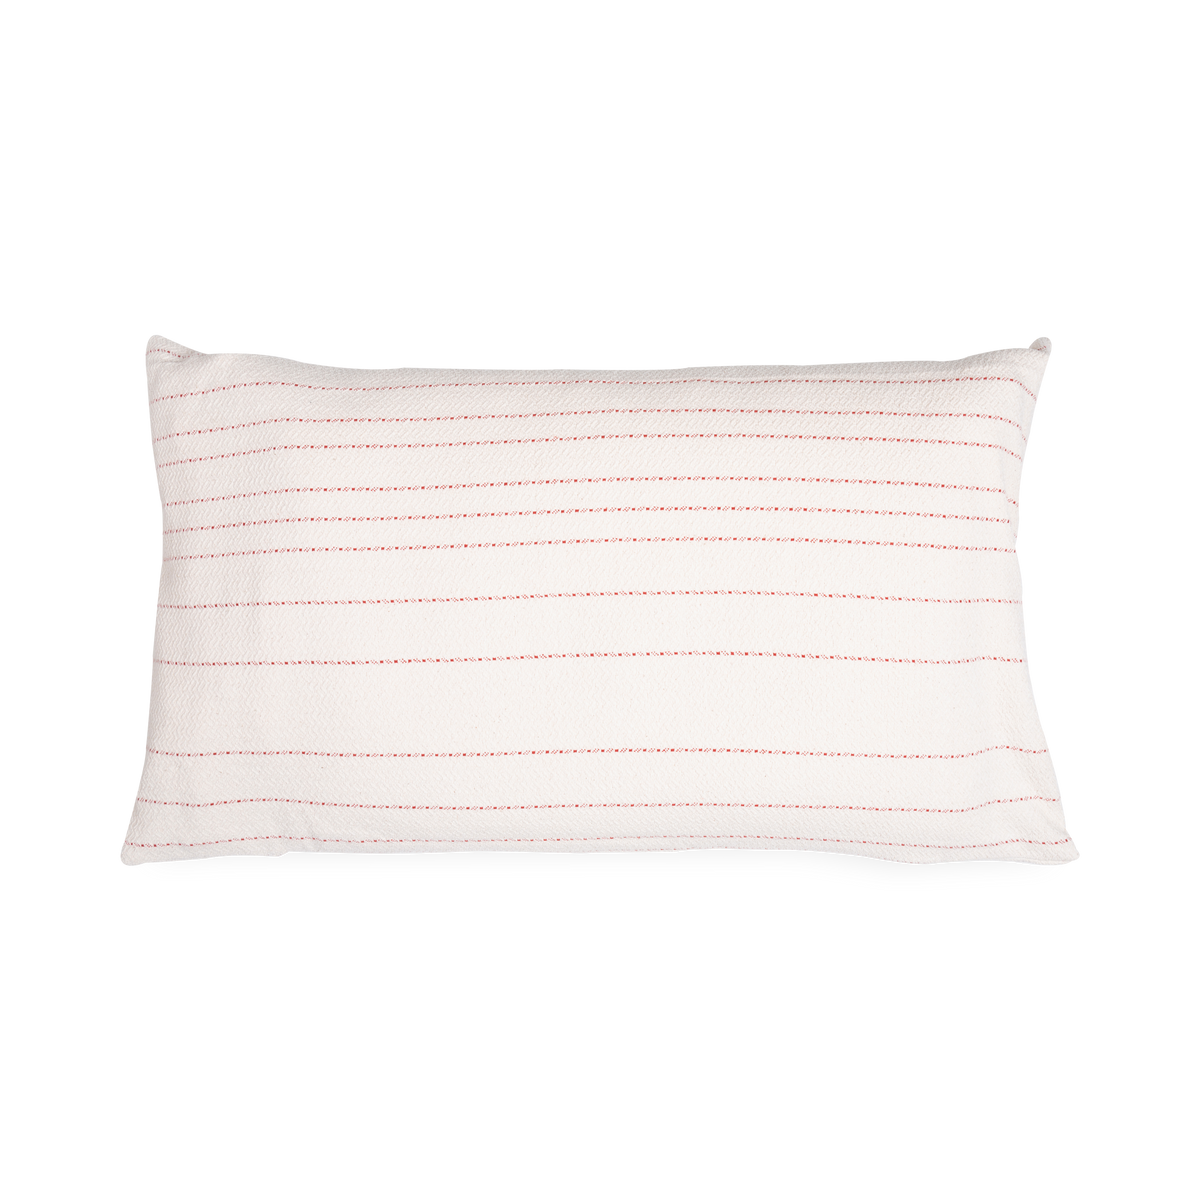 Providing a welcoming textural appeal to your seating or bedding collection, the Stitch Cotton Pillow uses a garment washed cotton to provide an exceptionally soft texture.